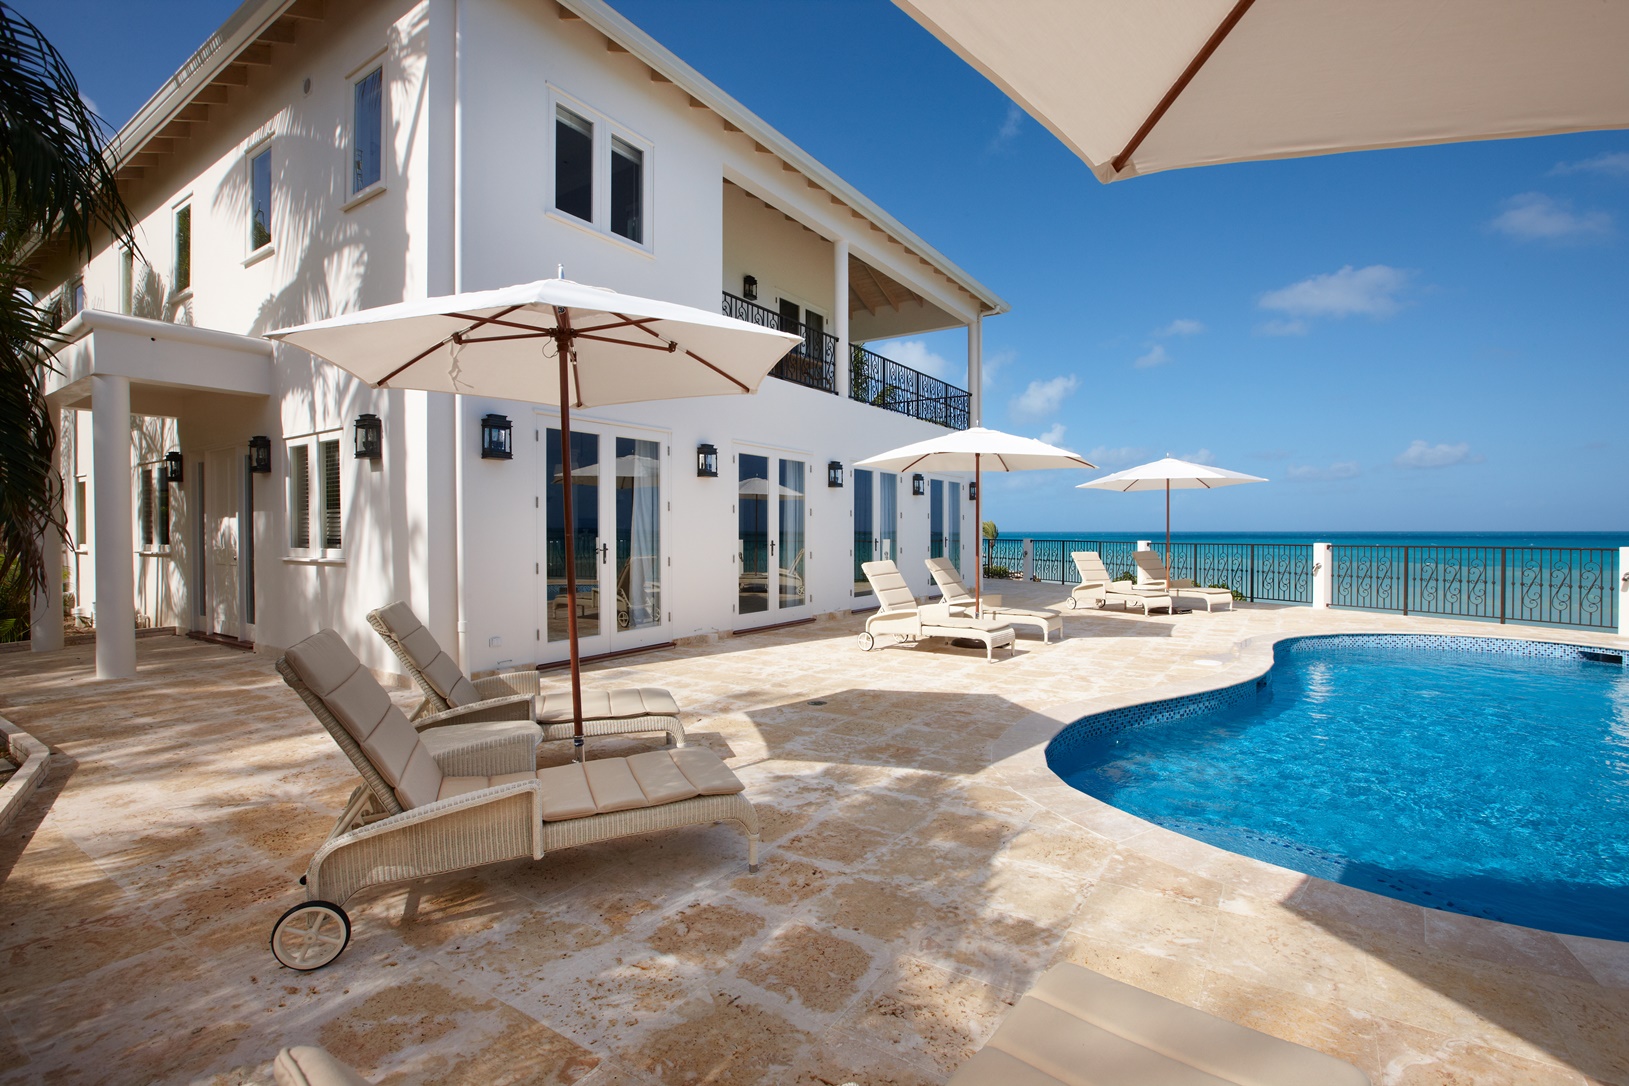 The private pool at Turtle Cottage in Antigua